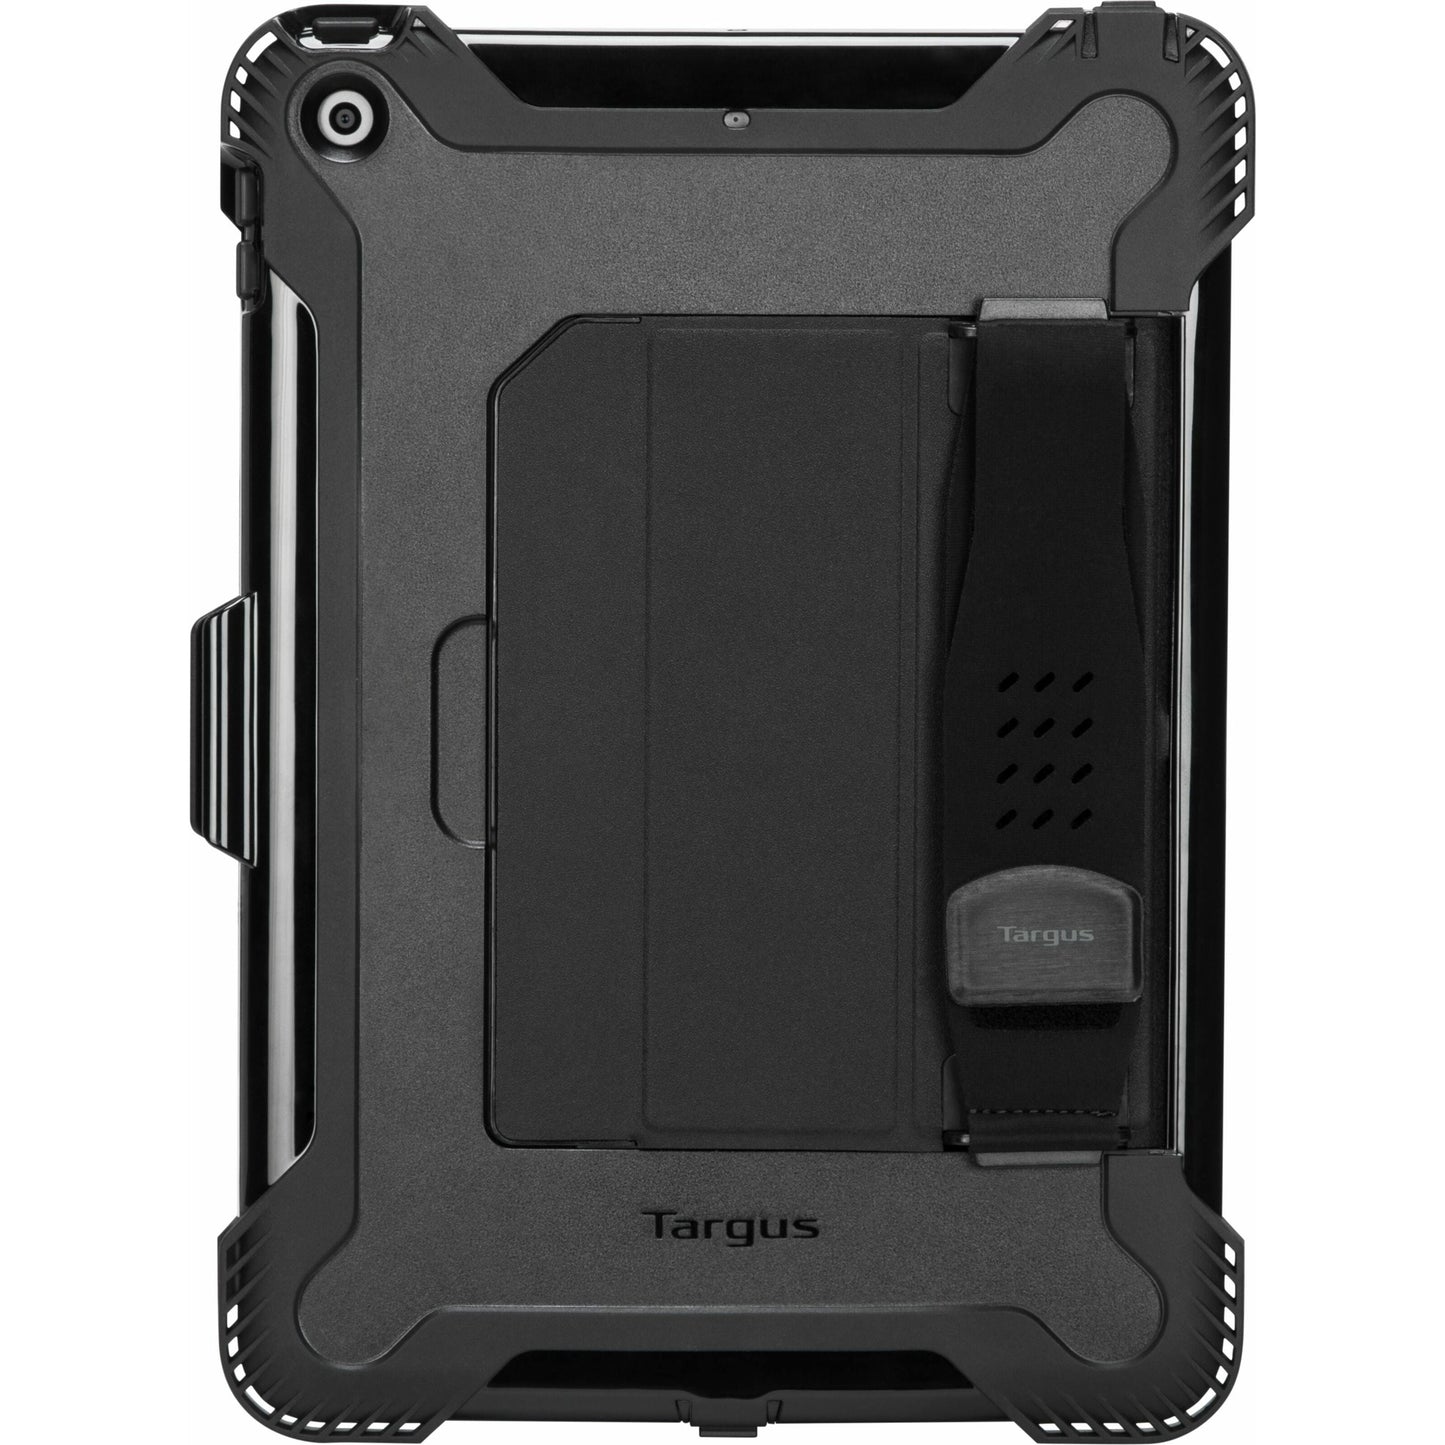 Targus SafePort THD500GL Rugged Carrying Case (Folio) for 10.2" to 10.5" Apple iPad (7th Generation) iPad (9th Generation) iPad (8th Generation) iPad Air iPad Pro Tablet - Black